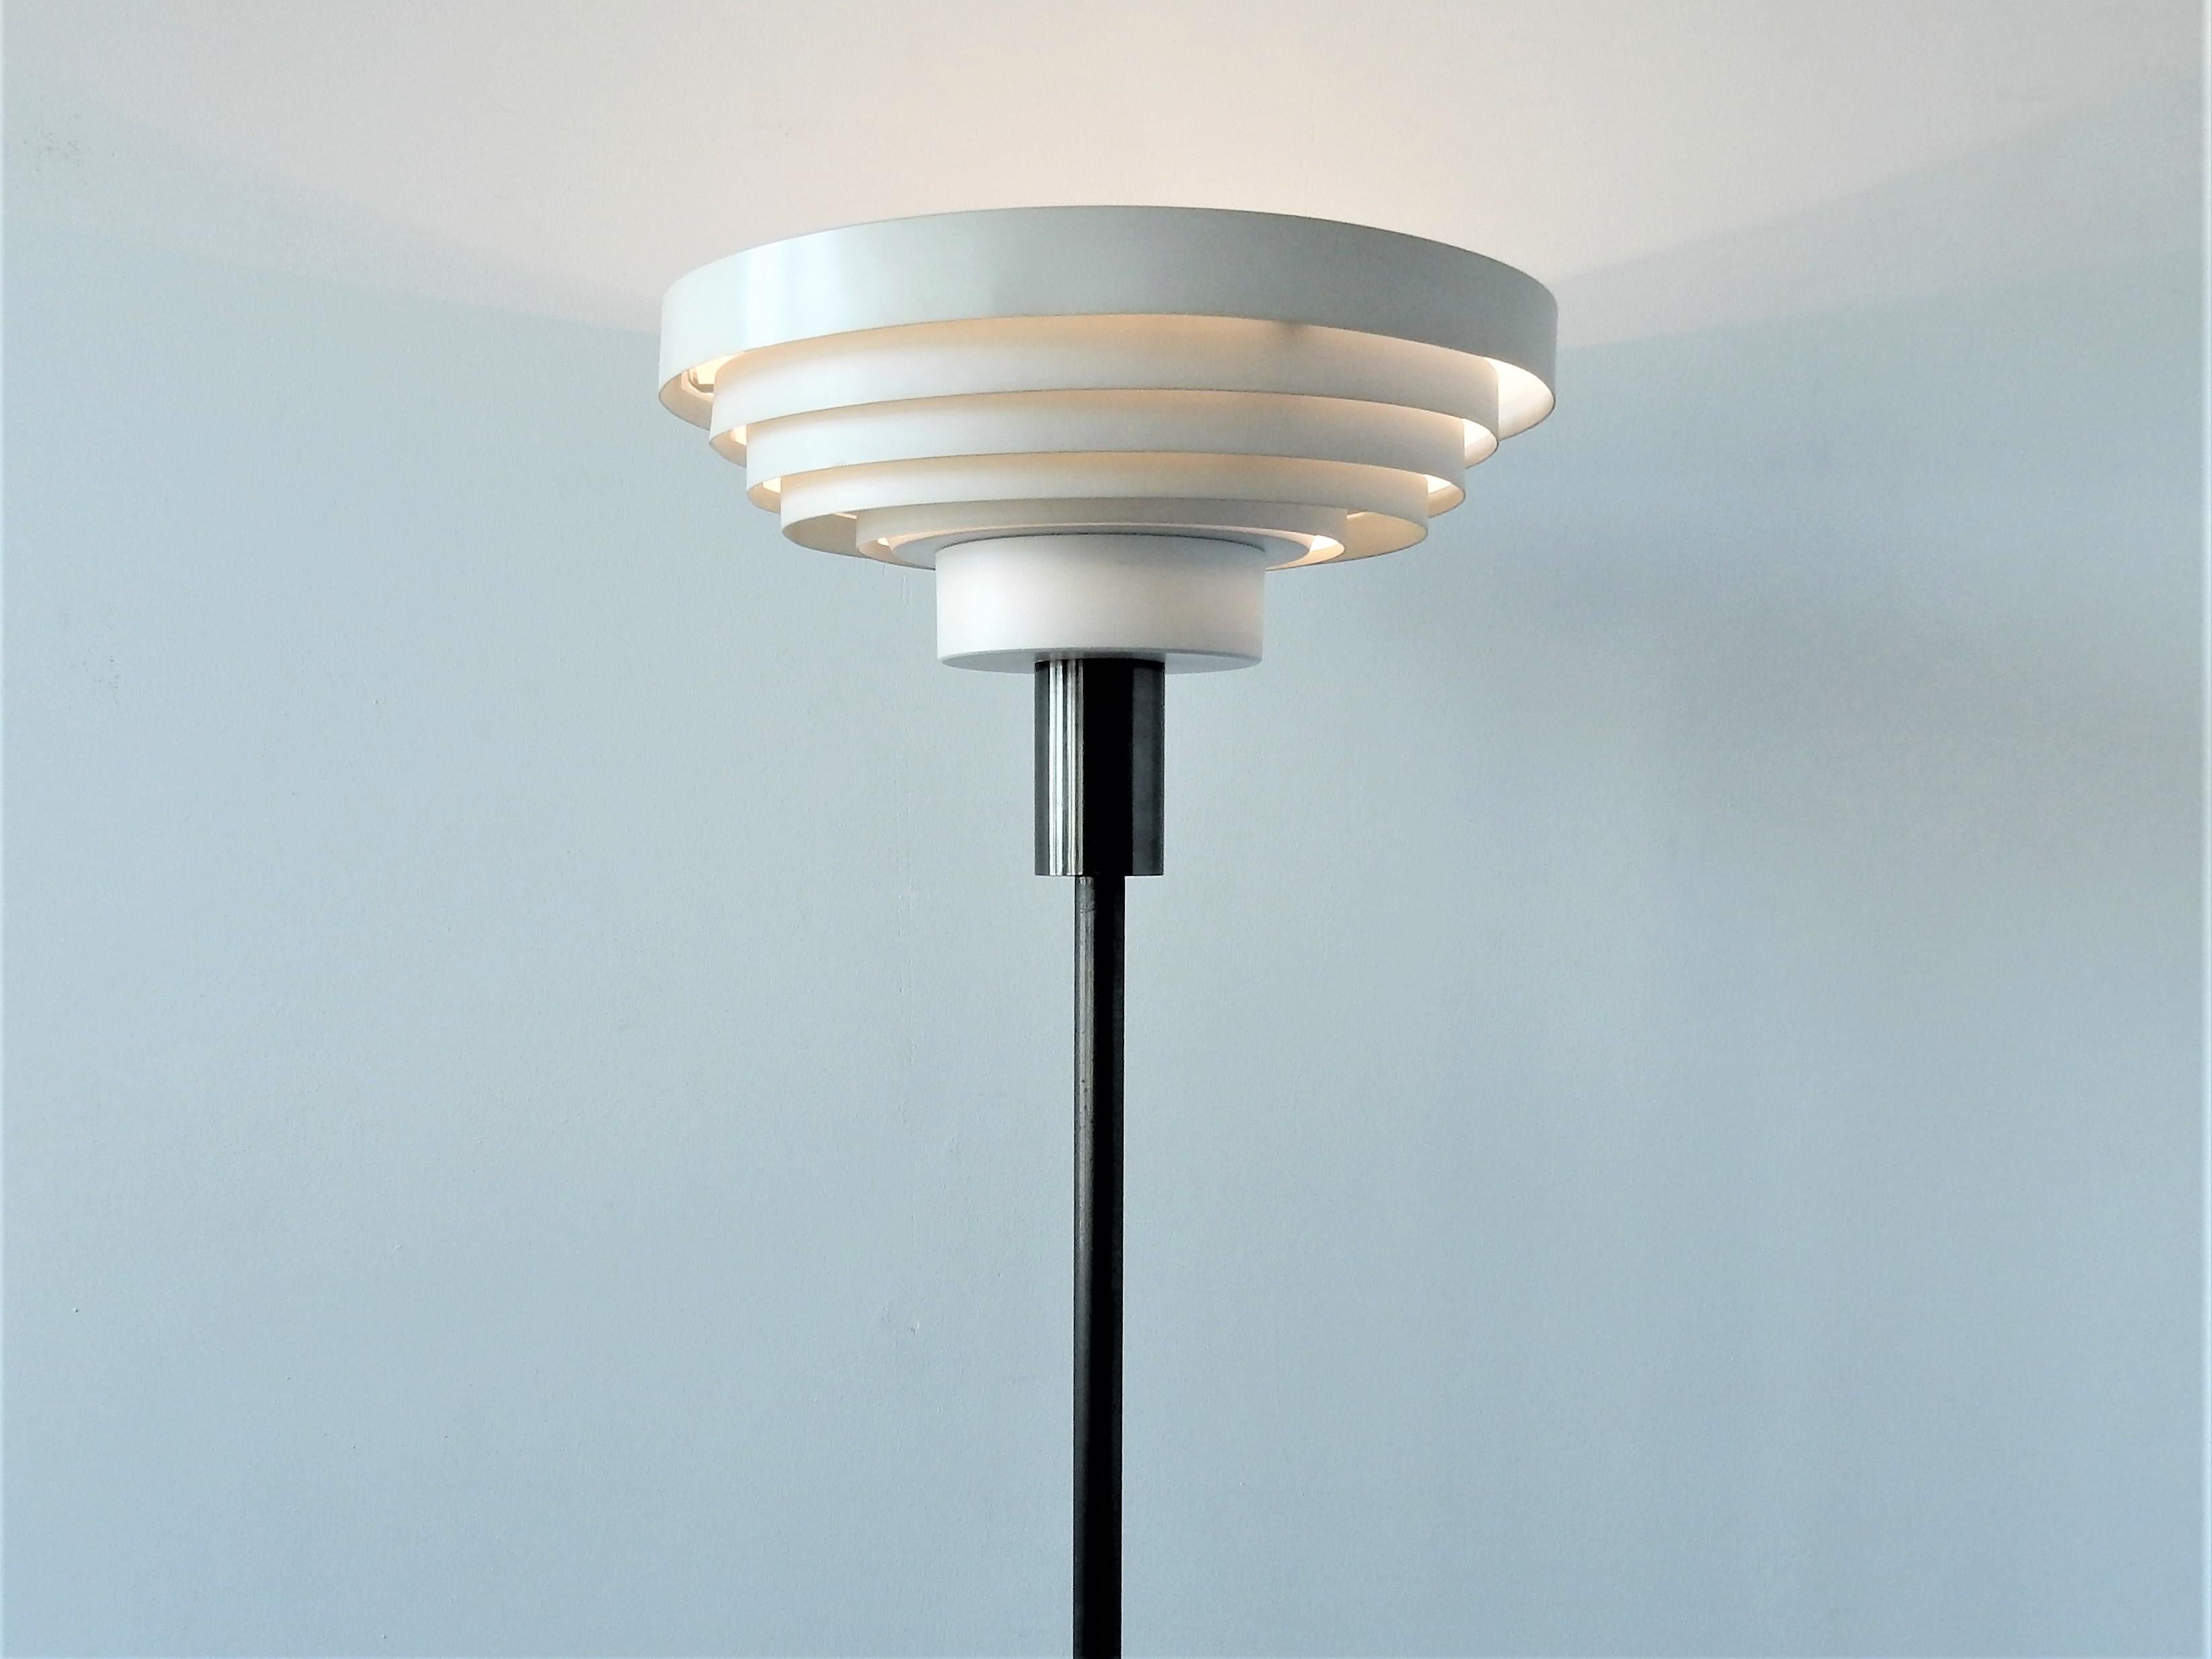 This floor lamp is a higher class and timeless design from the 1960s. It has a steelbronse metal base with white rings as a shade that gives a very nice direct and indirect light. The lamp is in a good condition with signs of age and use, see